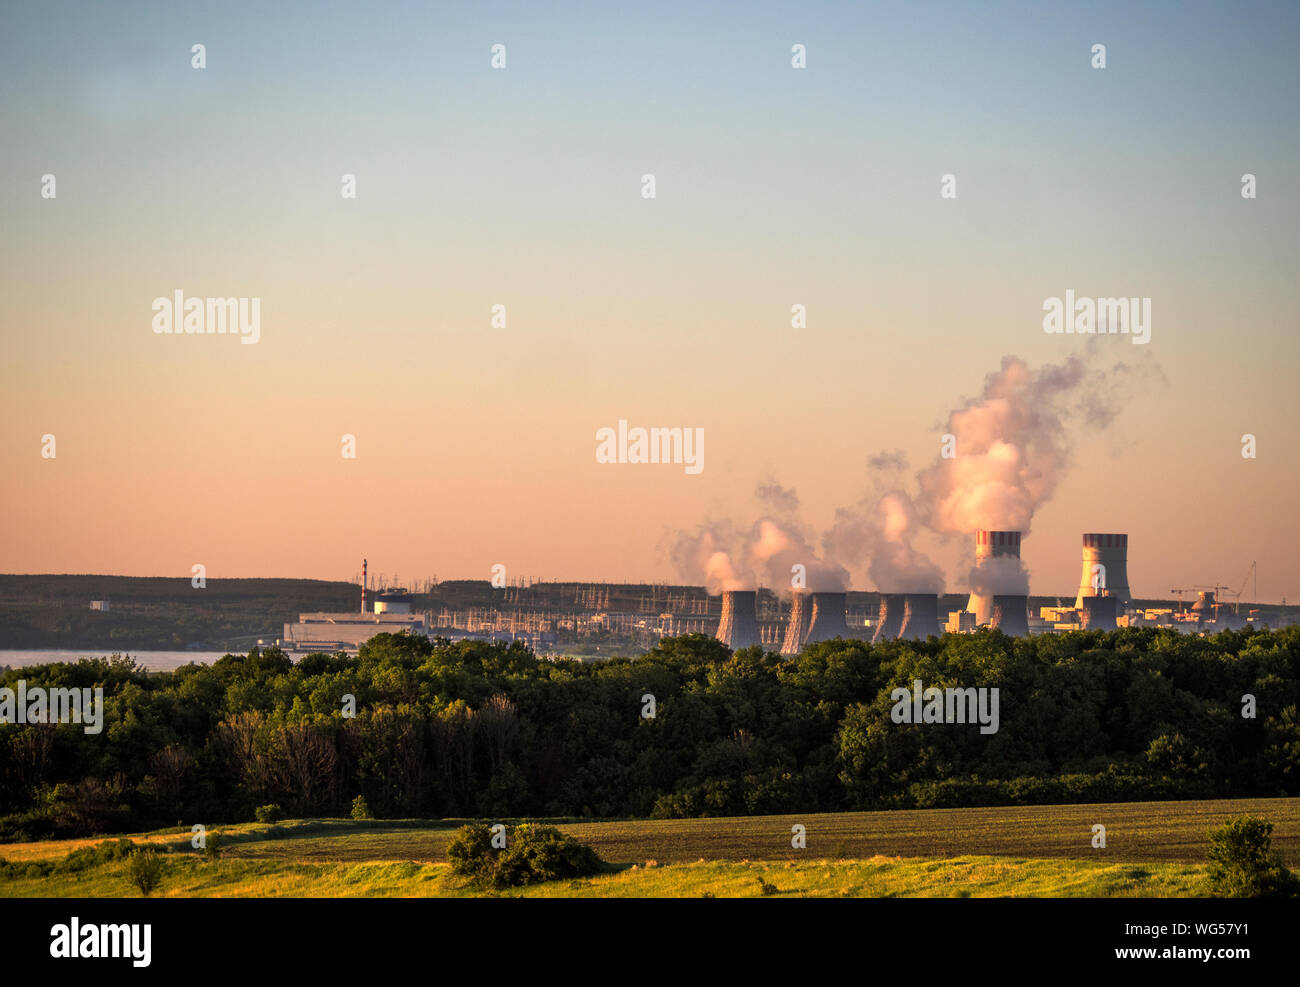 Cooling Towers At Nuclear Power Station Against Sky During Sunset Stock Photo